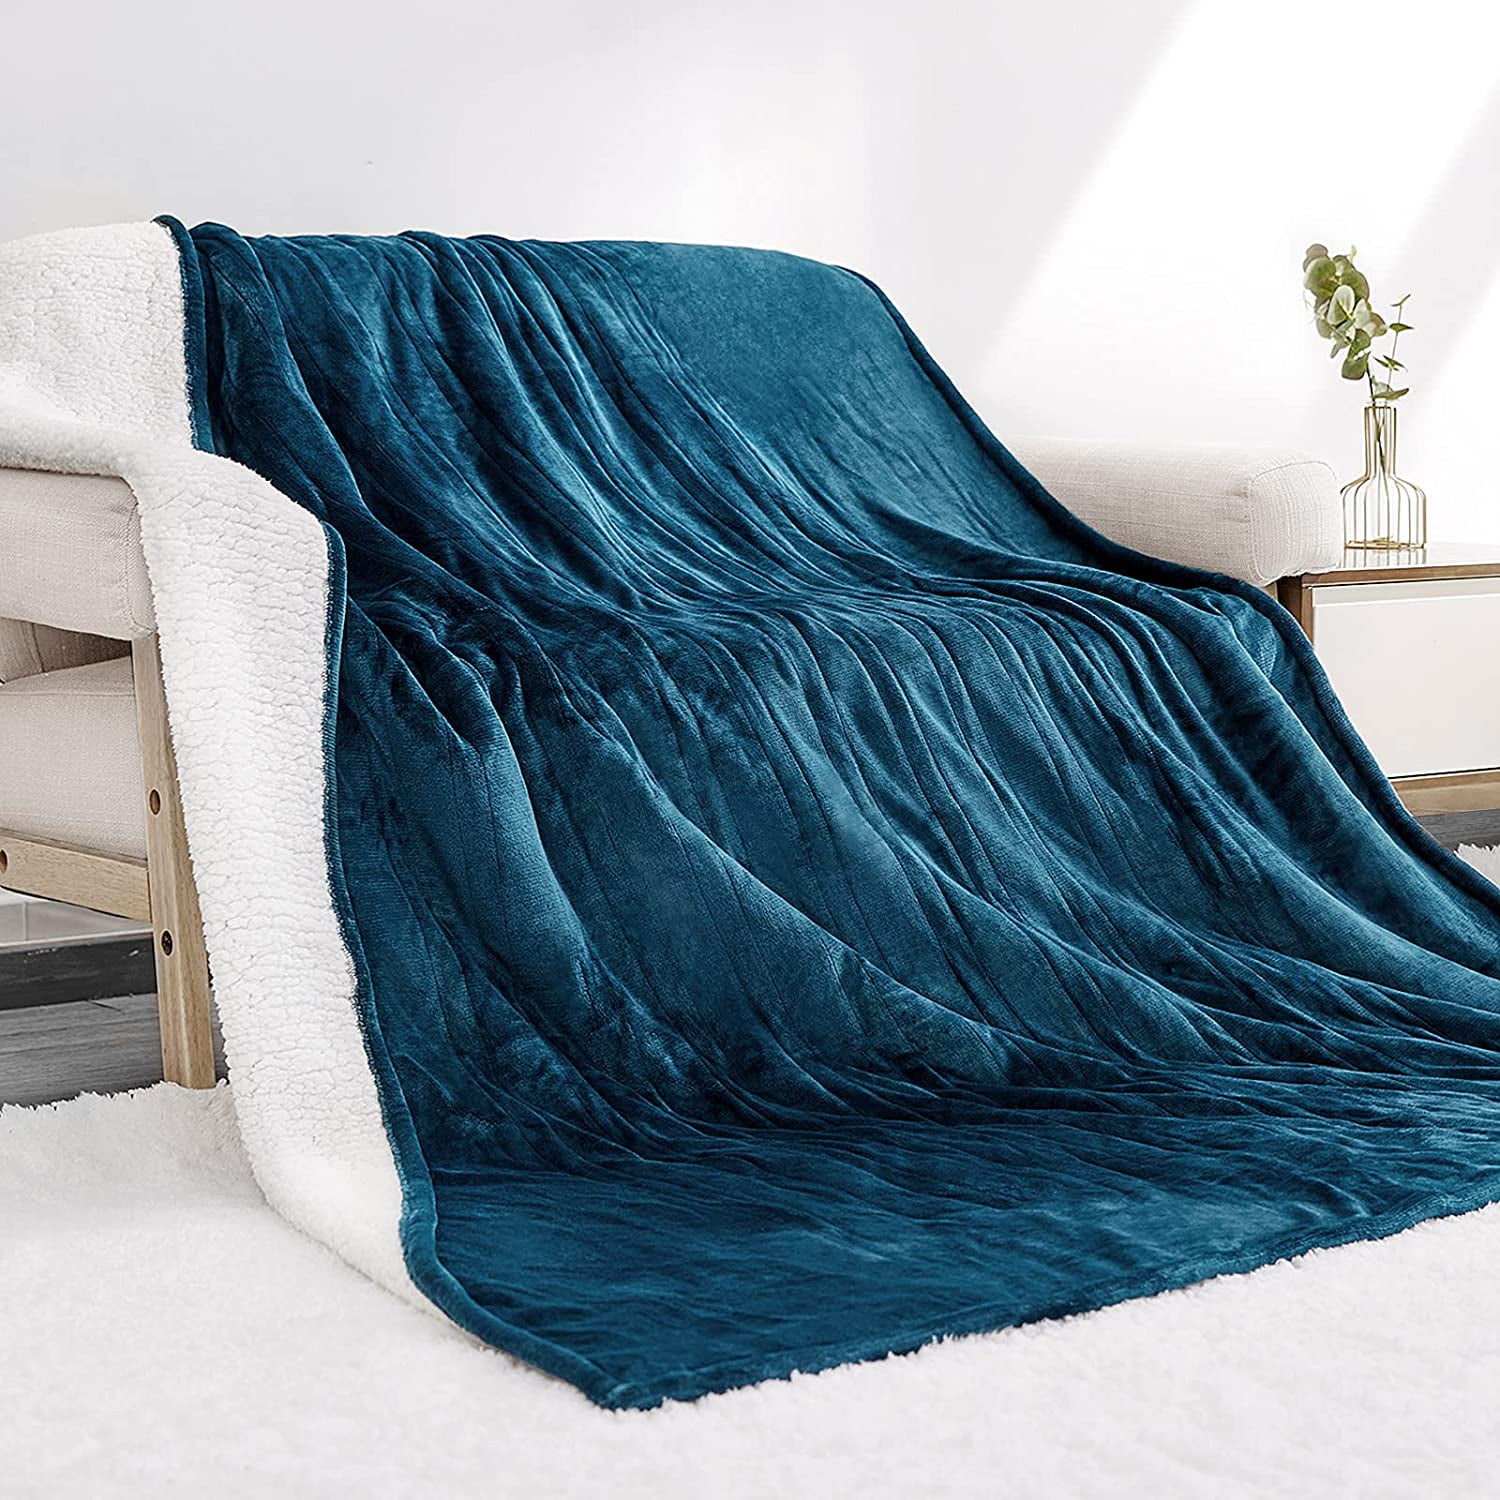 Toile/Blue Electric Quilted Top Heated Blanket Reversible Sherpa Fabric King 